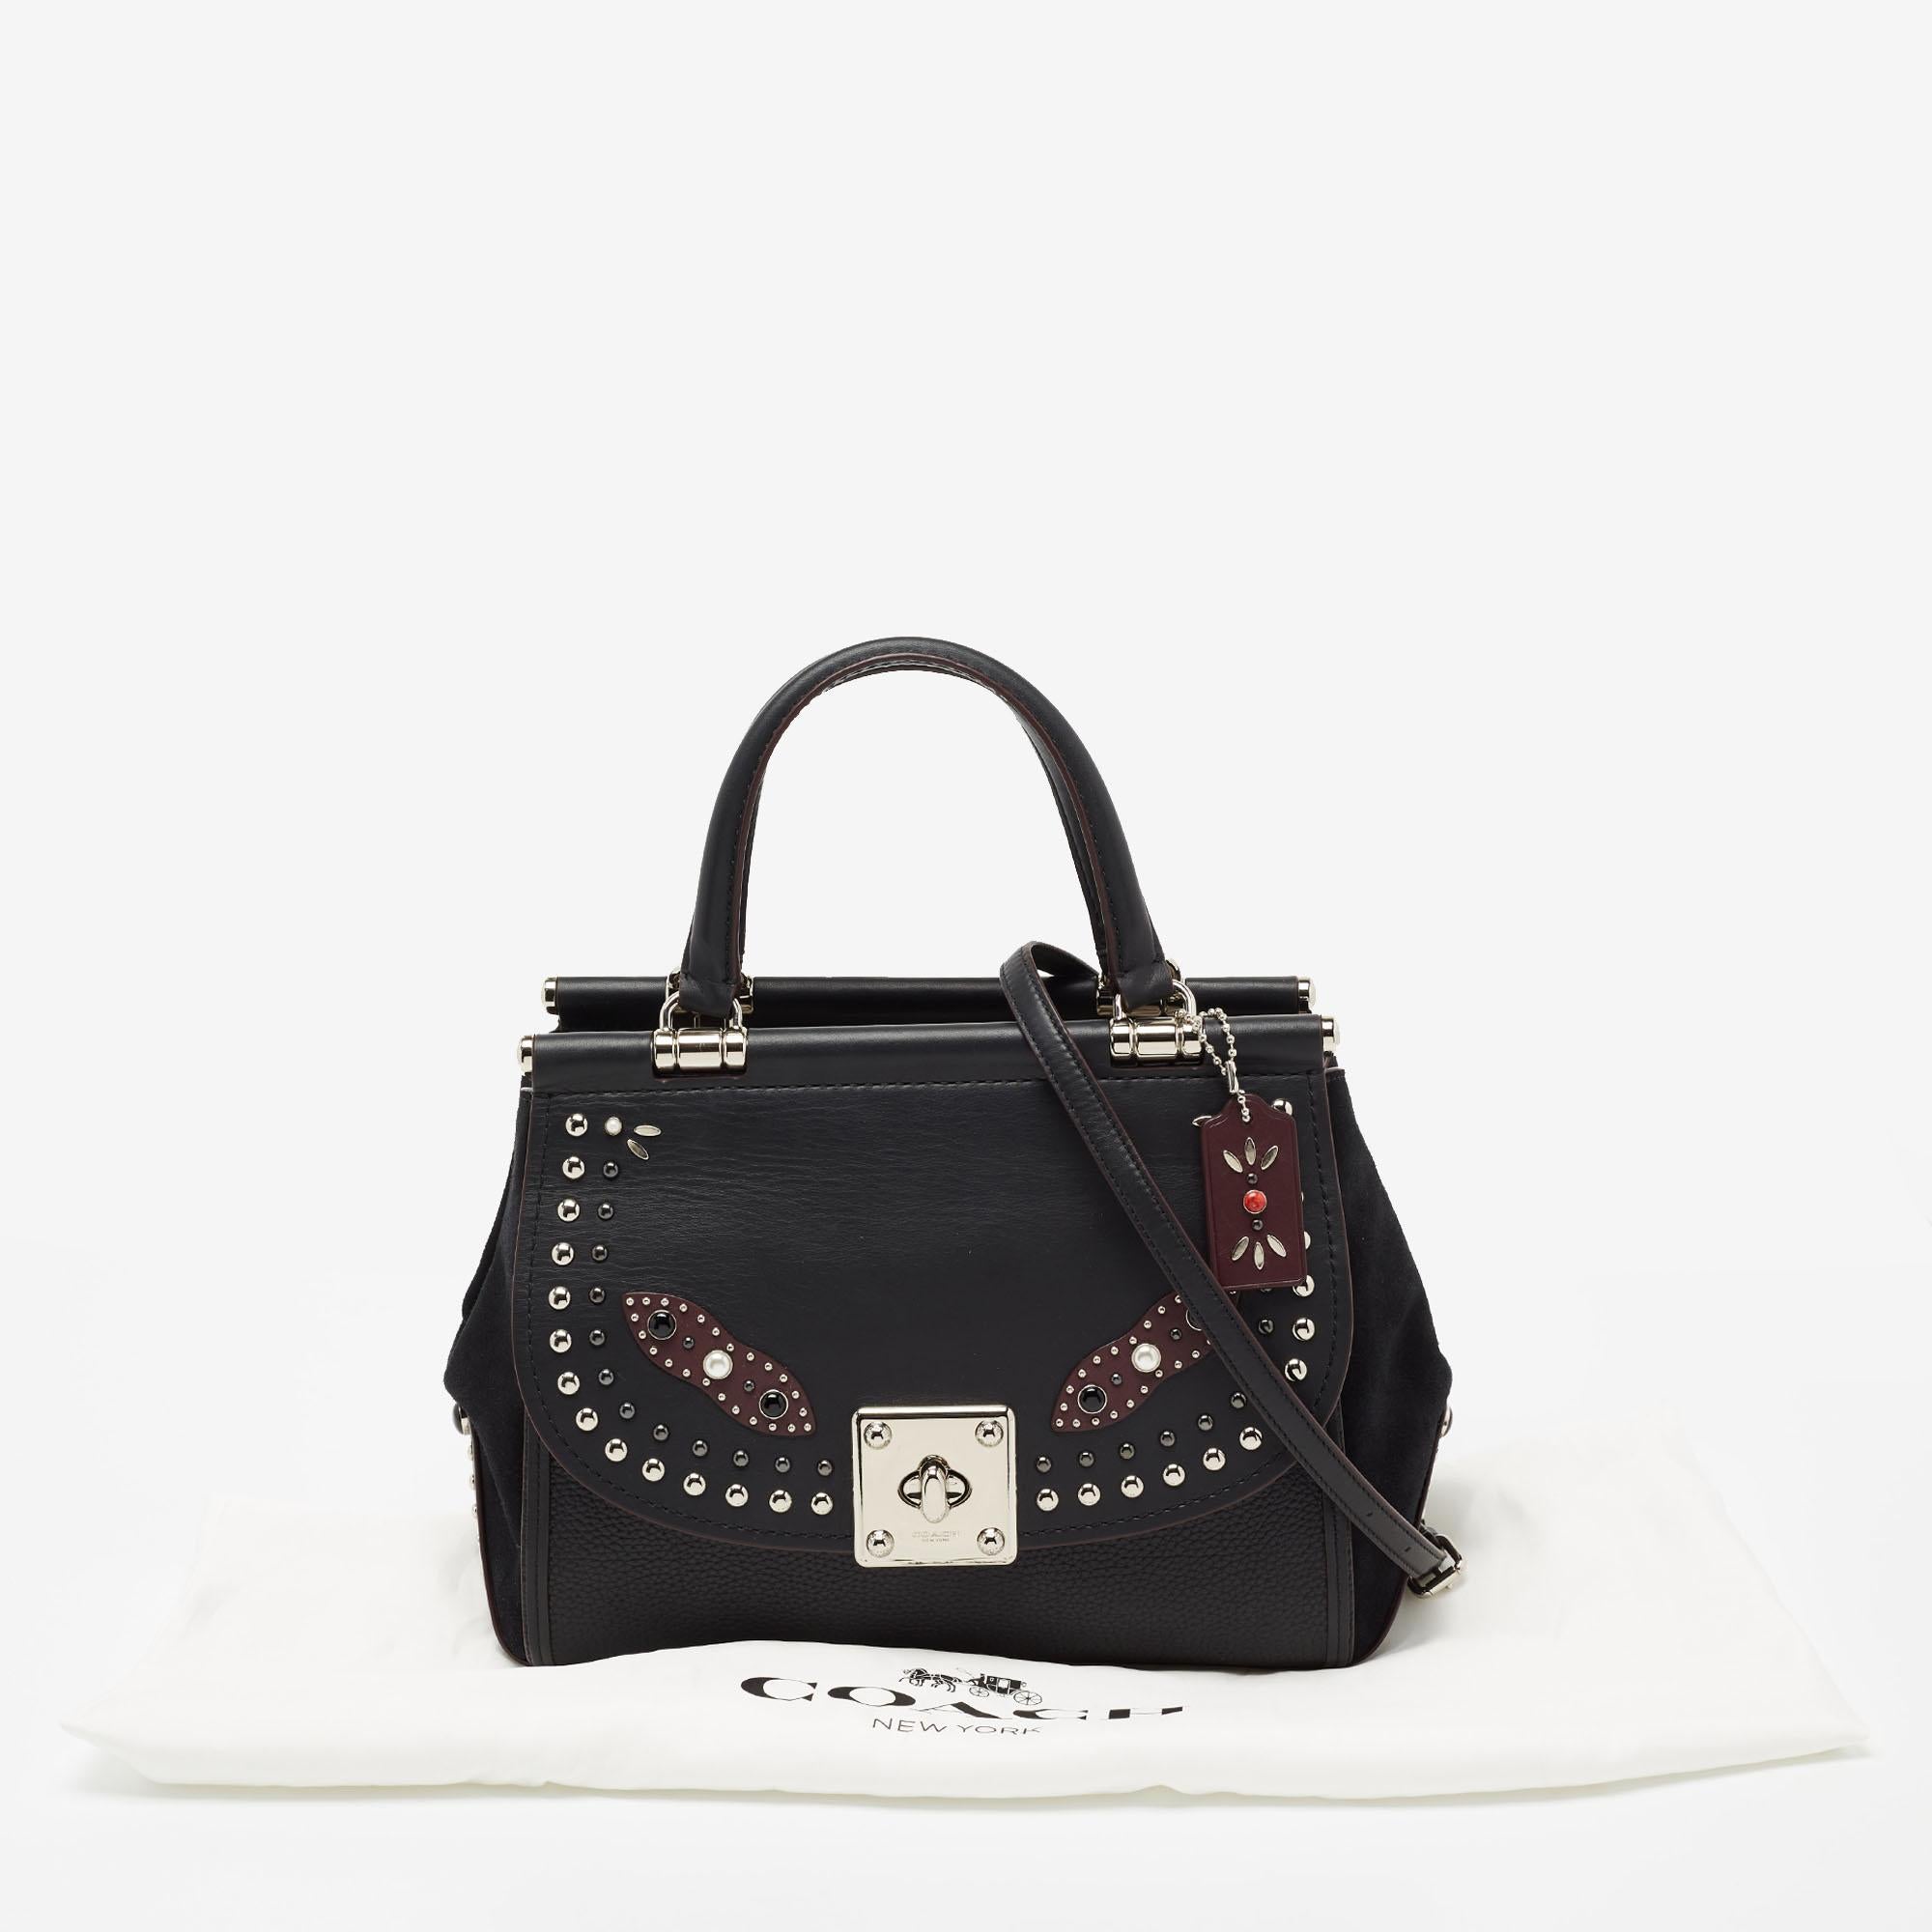 Coach Black Leather And Suede Embellished Carryall Drifter Satchel 7